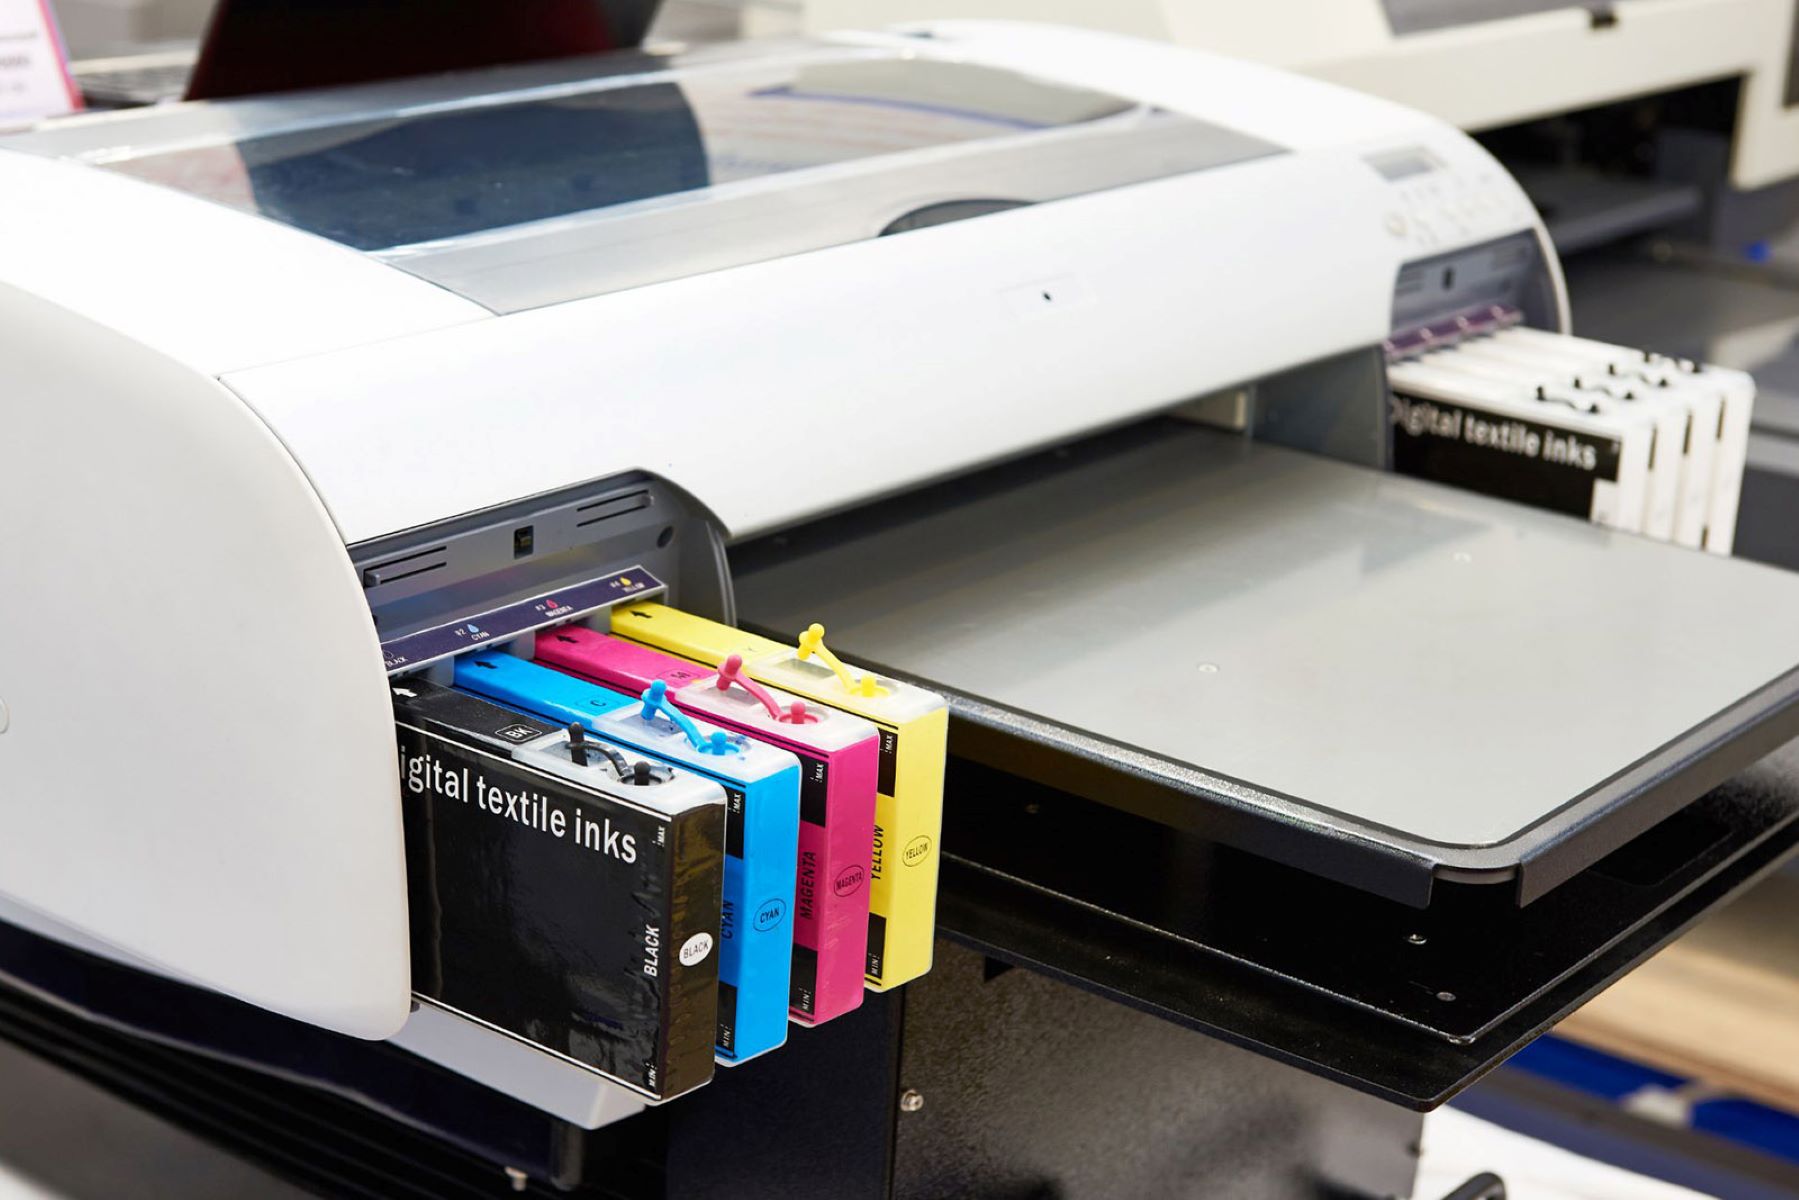 How To Put An Ink Cartridge In A Printer